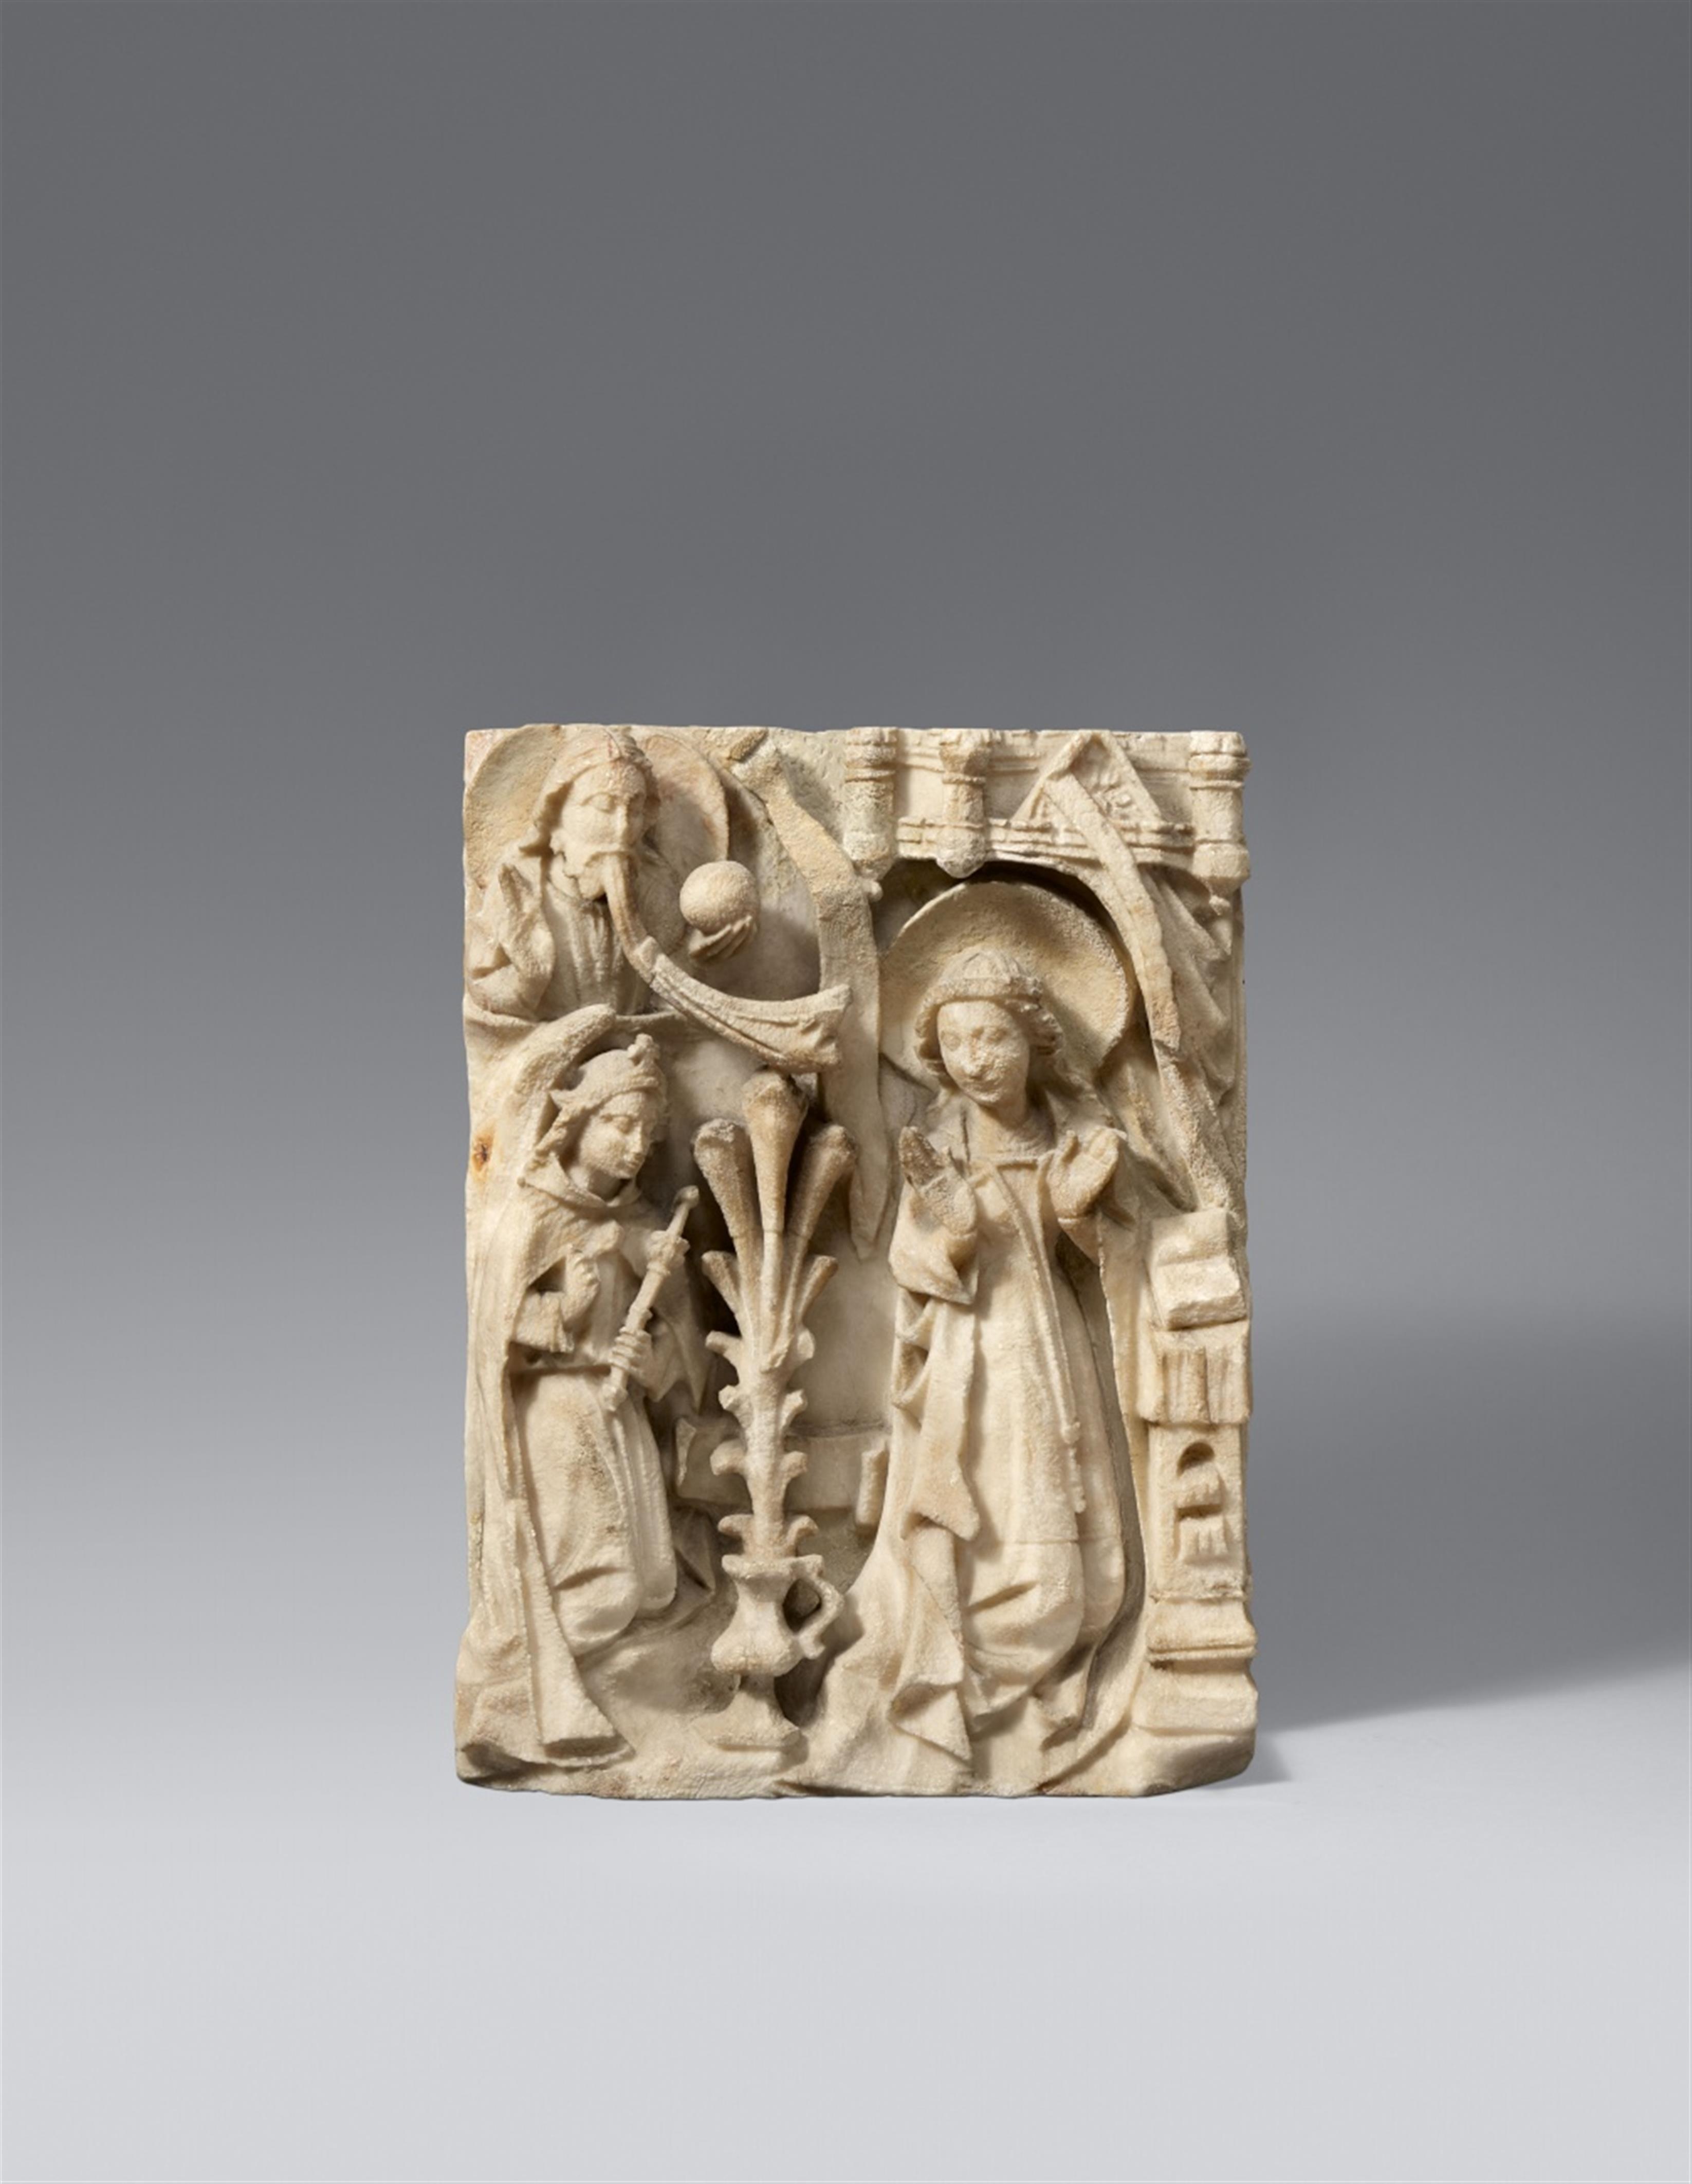 Nottingham mid-15th century - A mid-15th century Nottingham alabaster relief of the Annunciation - image-1